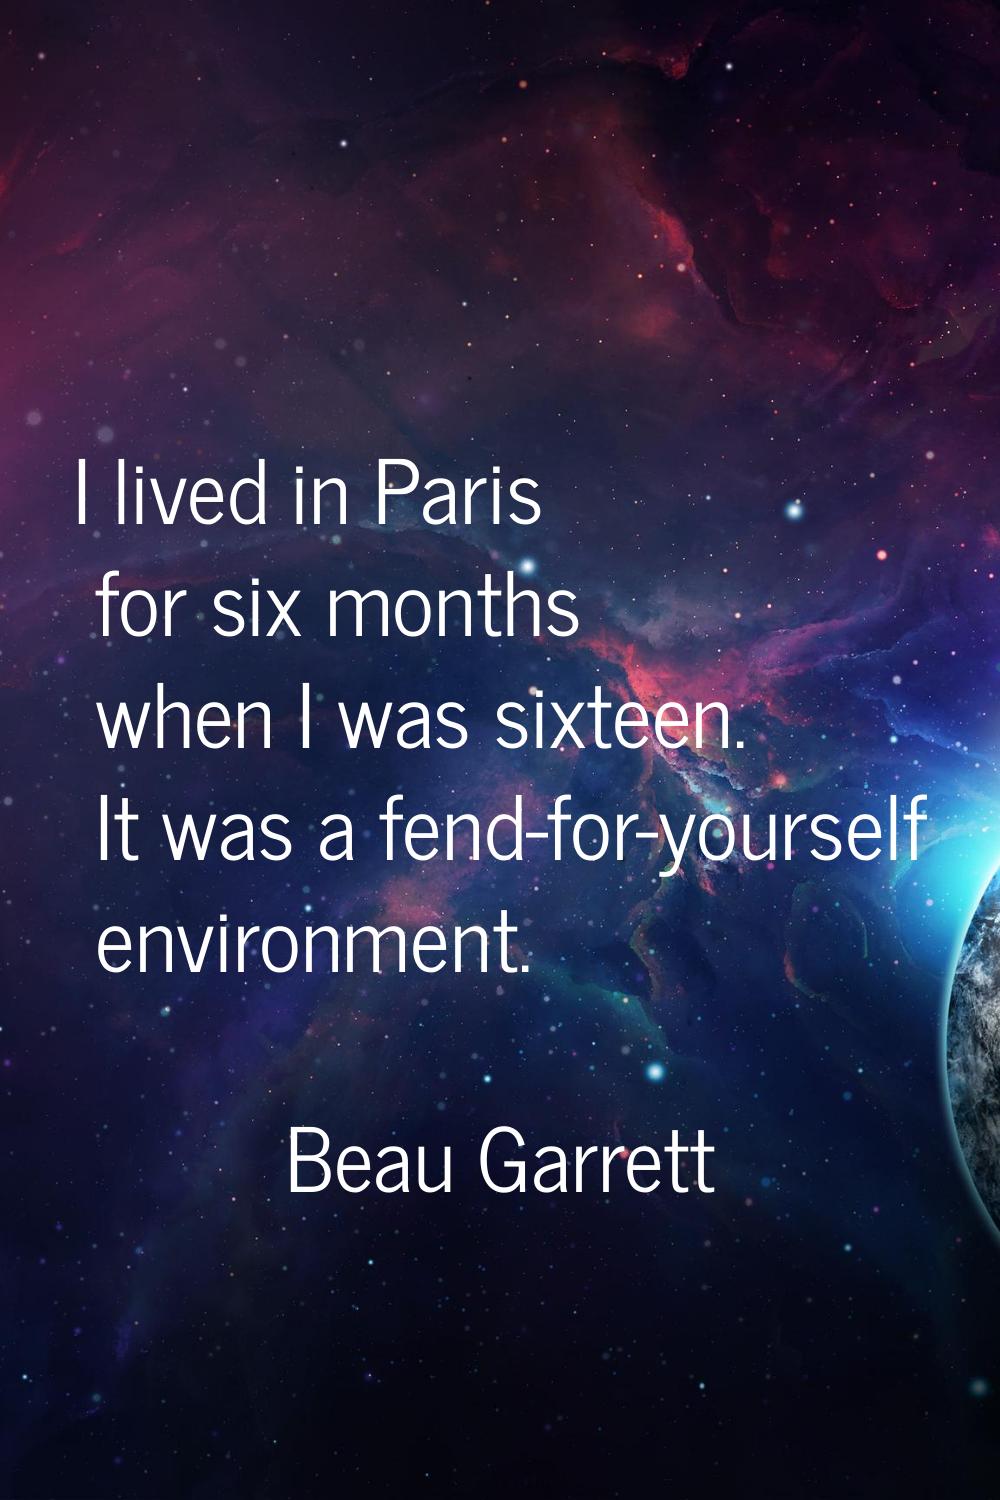 I lived in Paris for six months when I was sixteen. It was a fend-for-yourself environment.